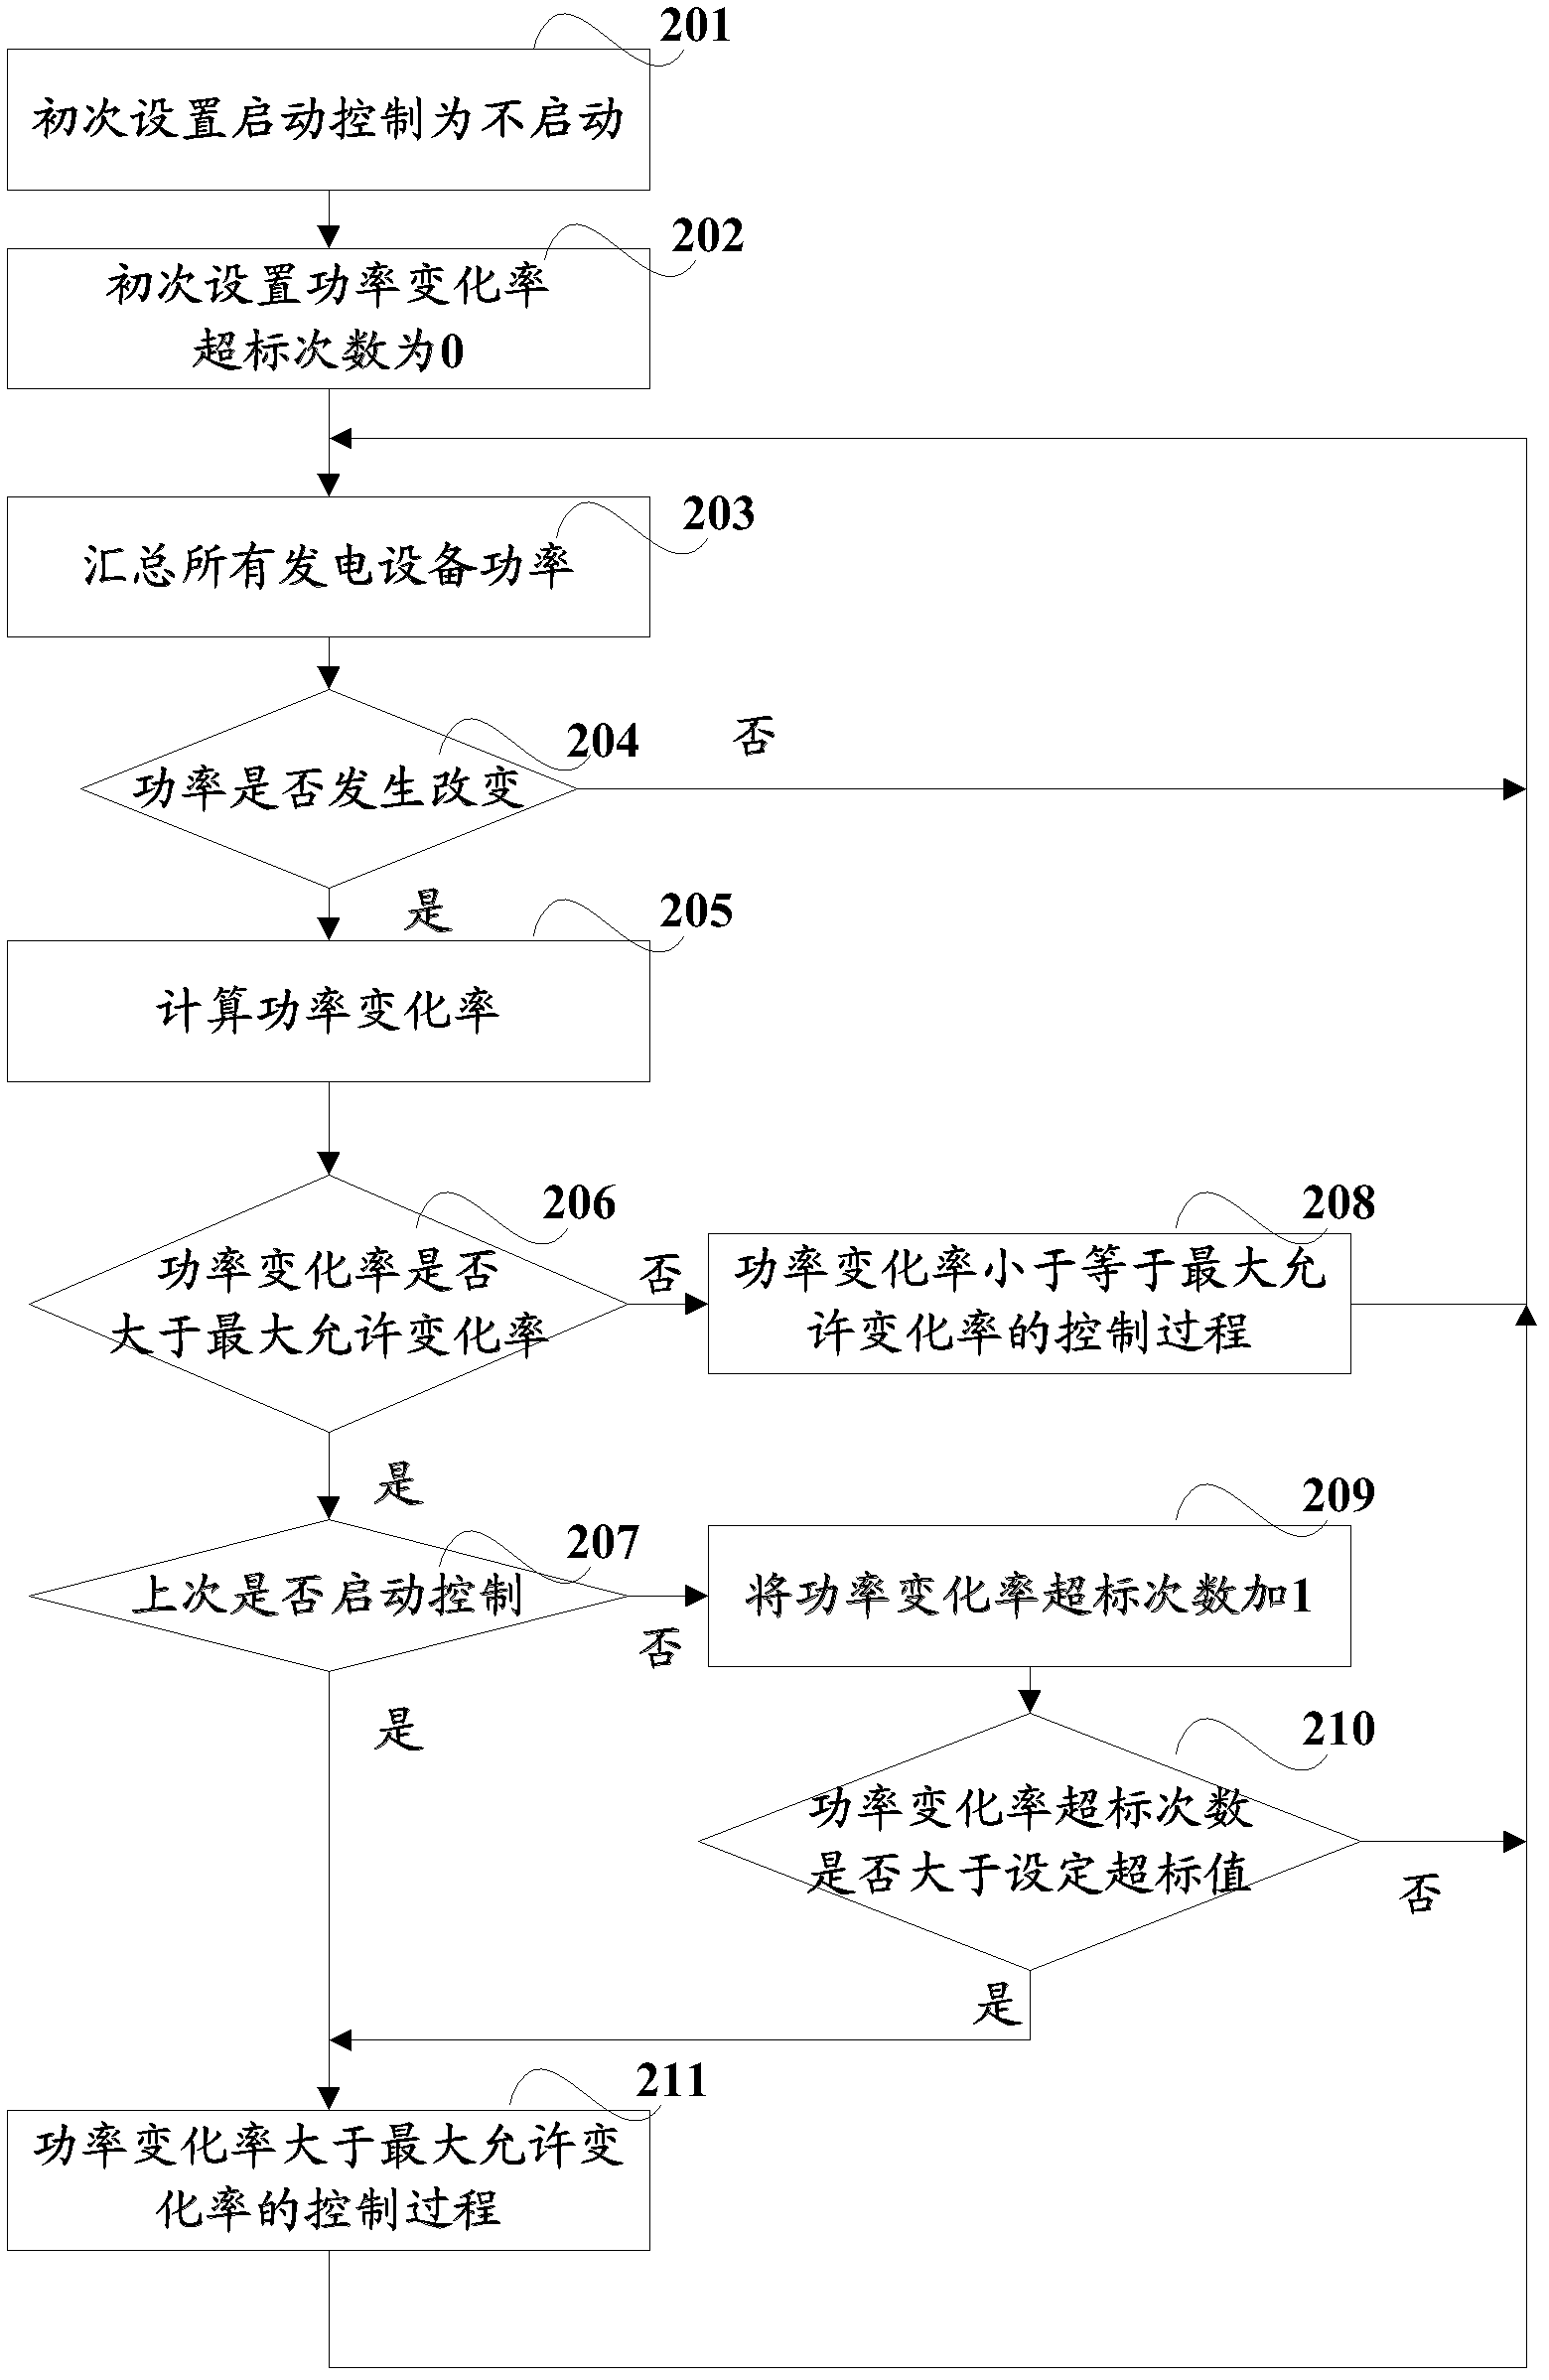 Method and system for controlling generated output of renewable energy source